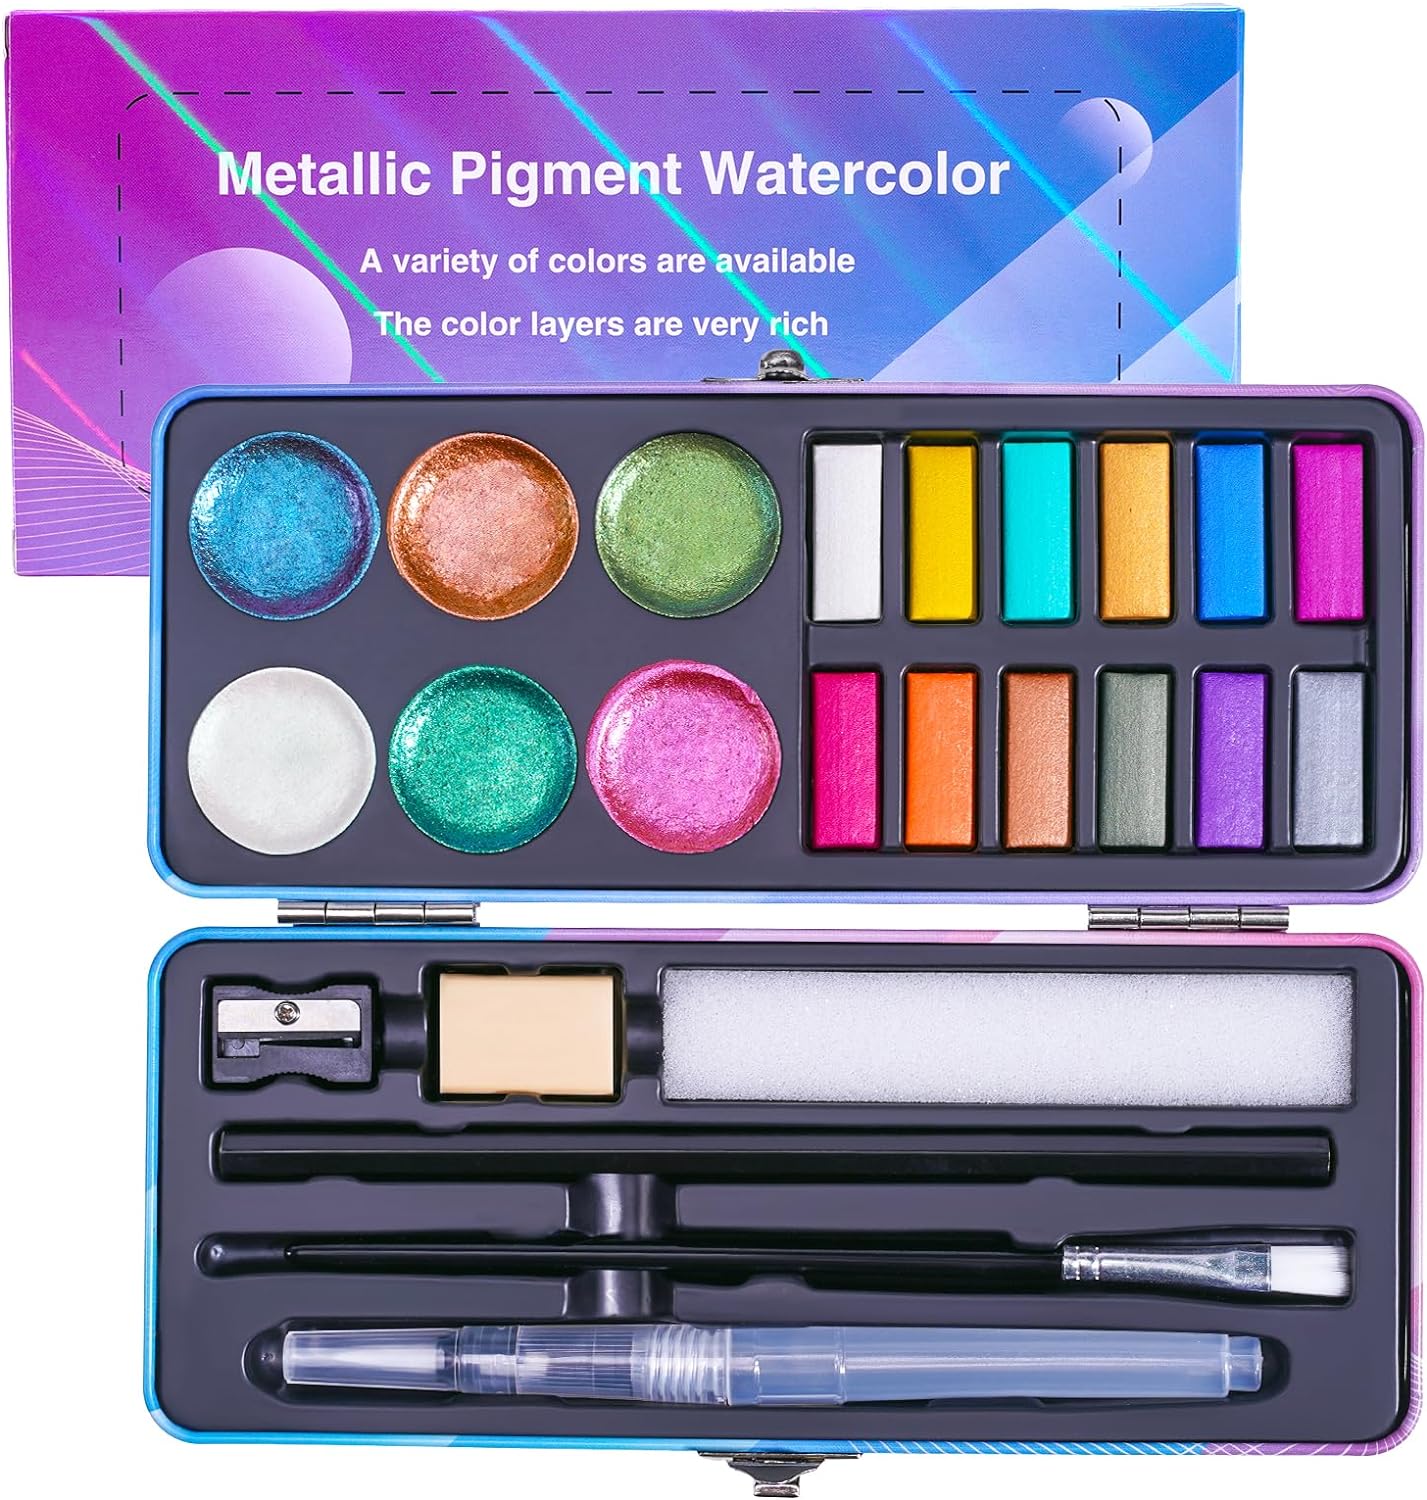  Dyvicl Glitter Metallic Watercolor Paint Set - 12 Assorted  Colors, Portable Box with Water Brush, Sparkle Metallic Accents for Black  Paper Drawing, Illustrating, Making Card, Coloring Books : Everything Else